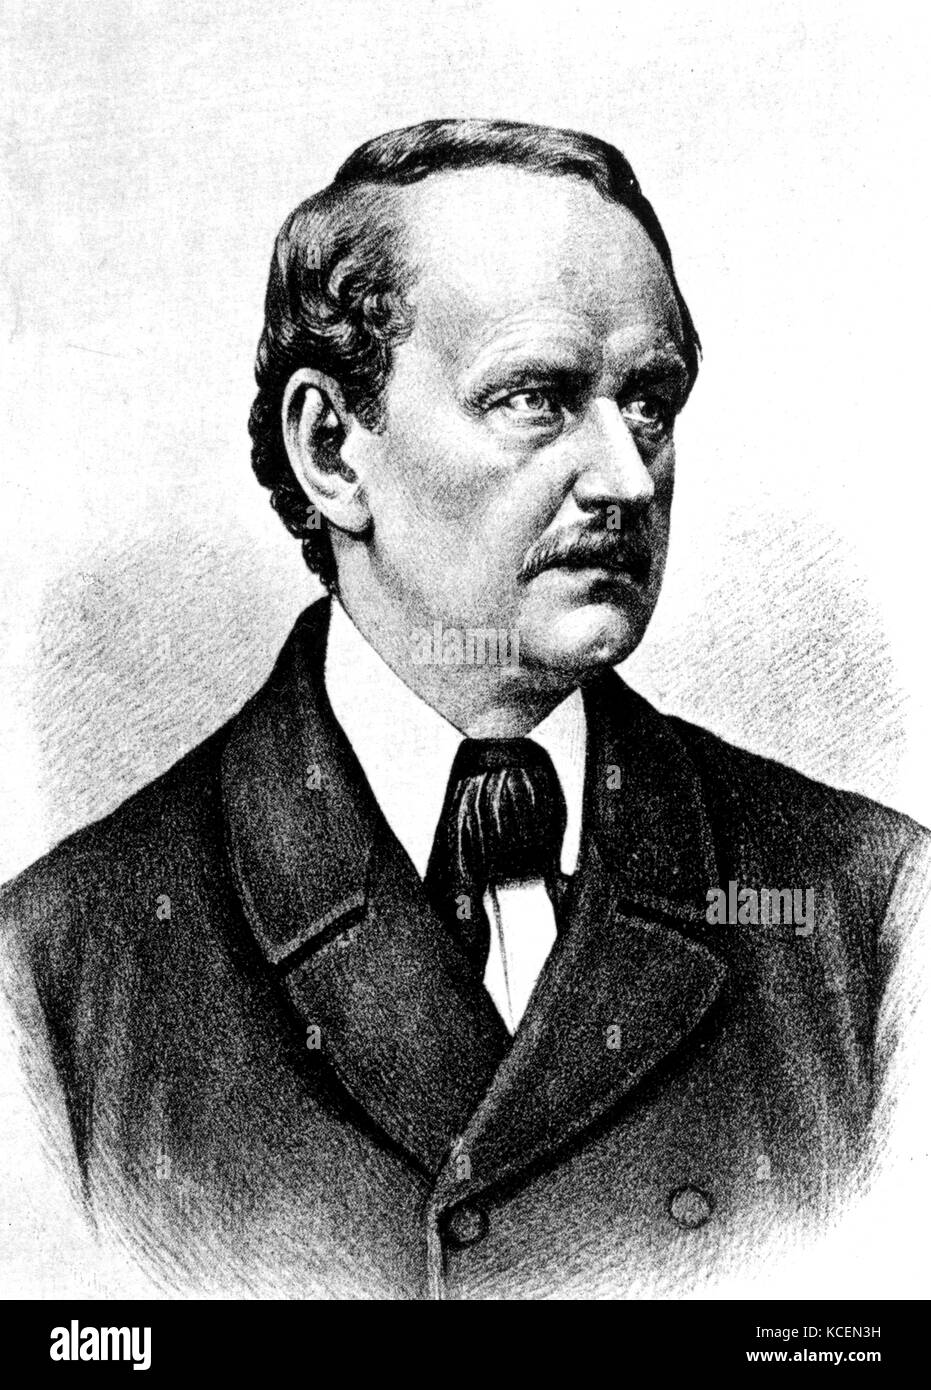 Matthias Jakob Schleiden (5 April 1804 – 23 June 1881) was a German botanist and co-founder of the cell theory, along with Theodor Schwann and Rudolf Virchow. Stock Photo